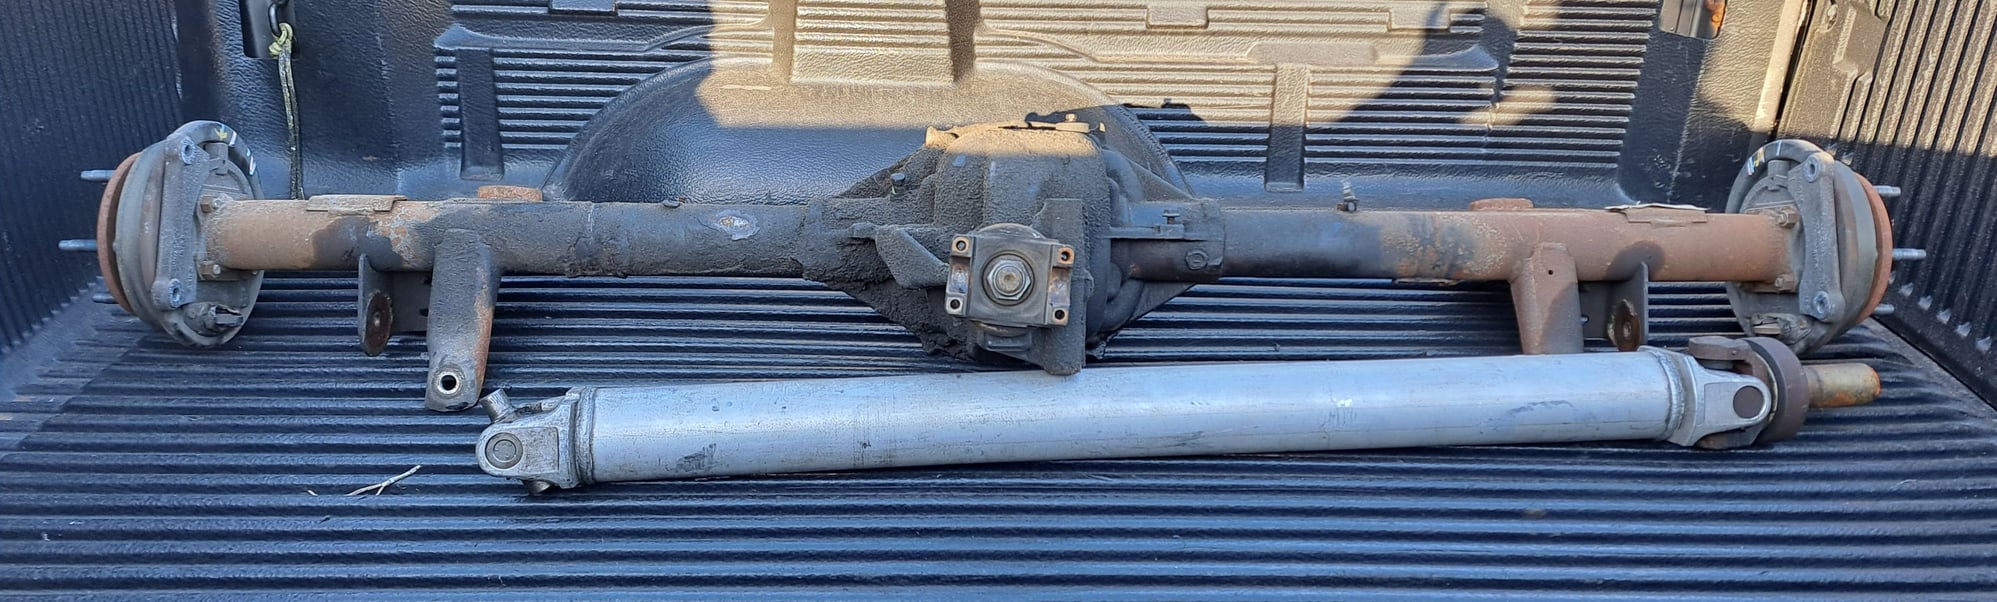 Drivetrain - 10 bolt 4 channel, TC, ABS, LSD, 2.73 gears - Used - 1982 to 2002 Chevrolet Camaro - 1982 to 2002 Pontiac Firebird - Terre Haute, IN 47802, United States